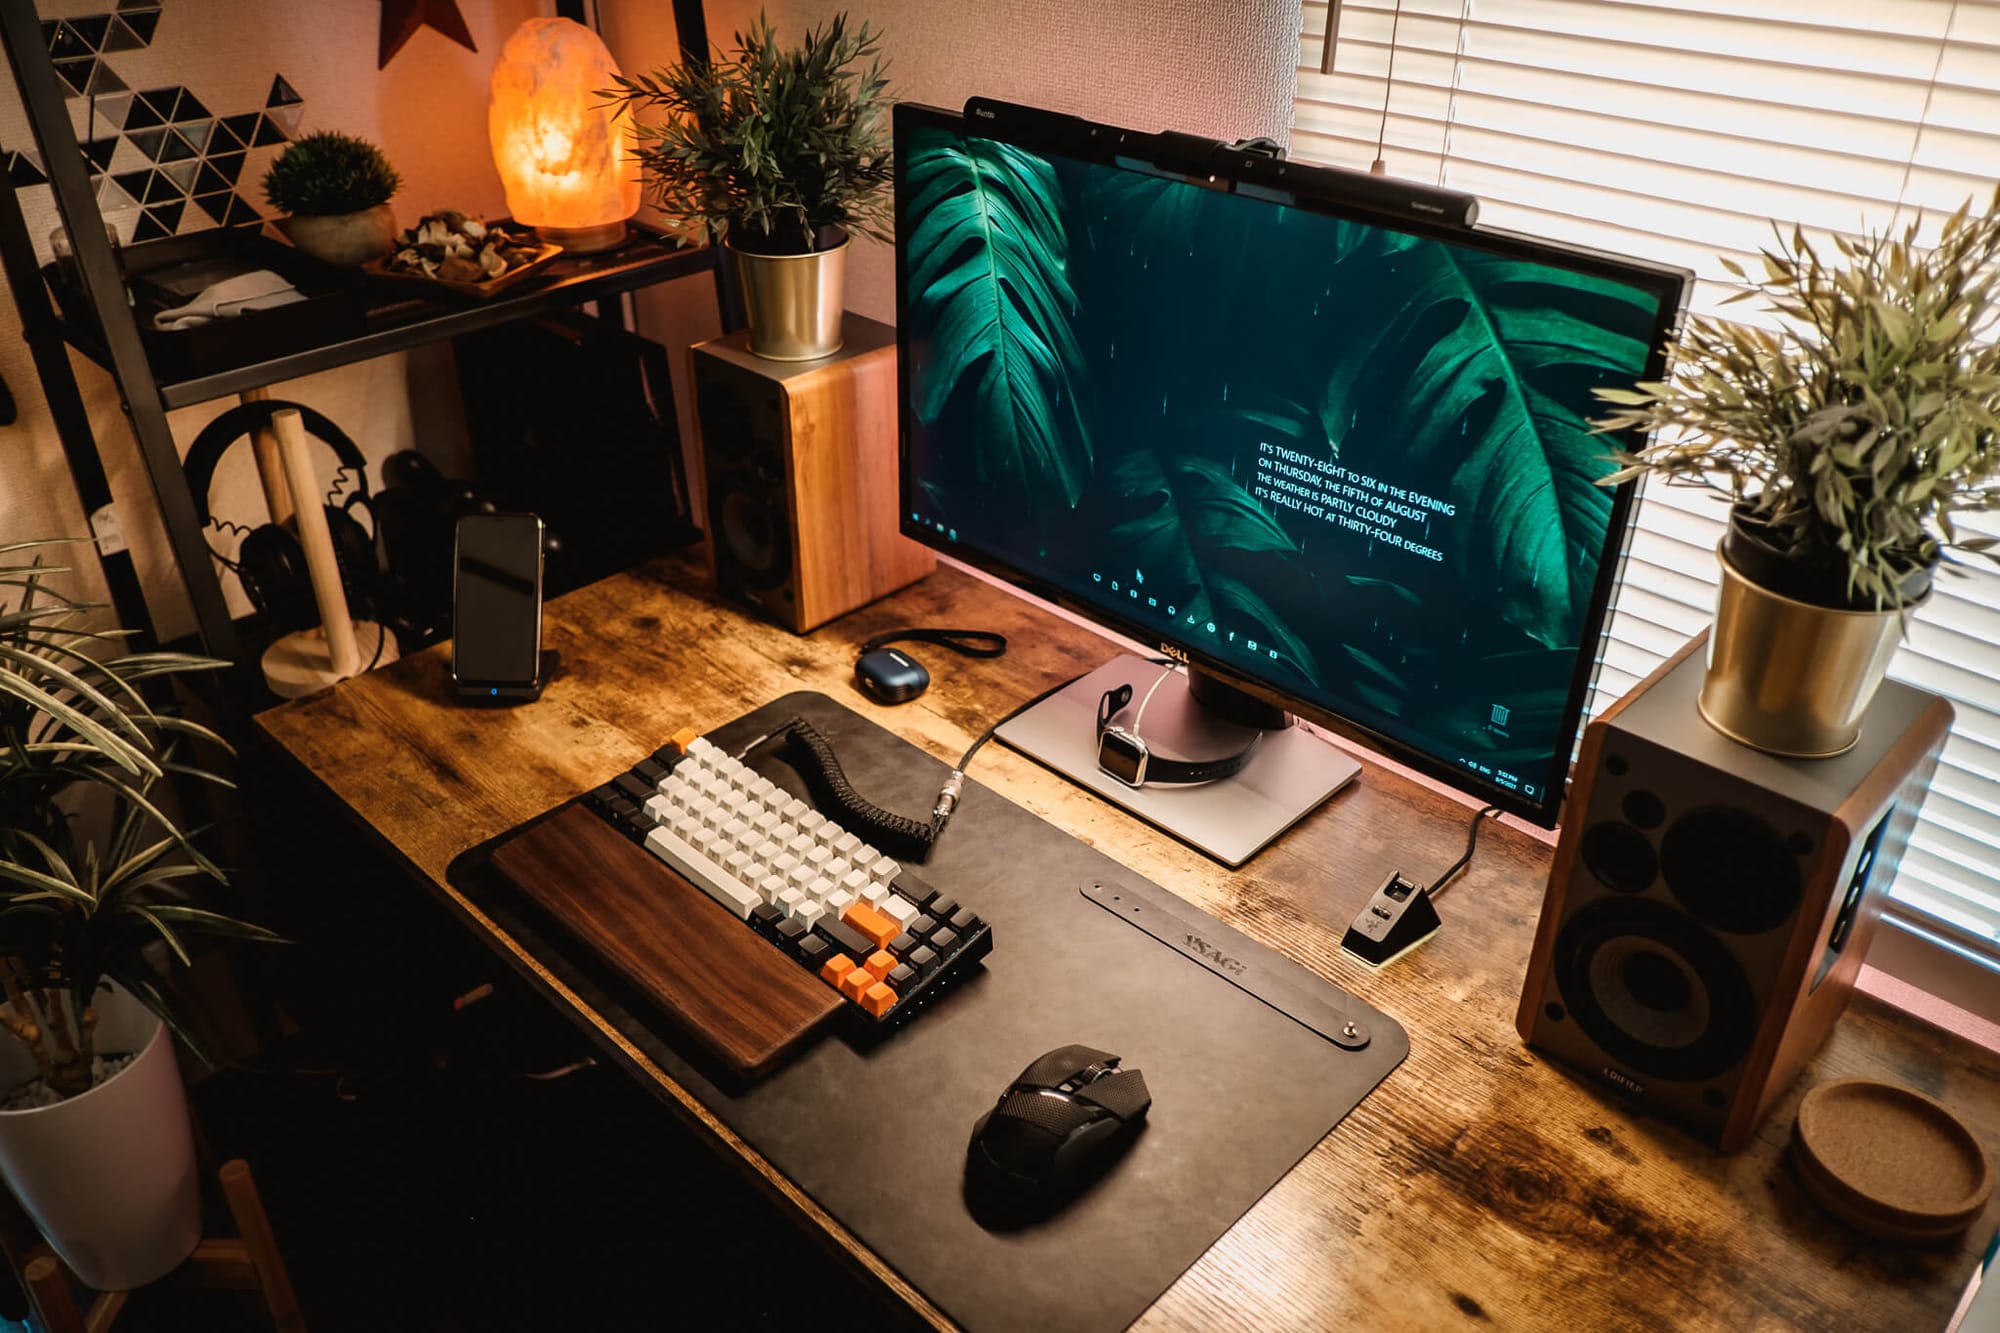  A well-organised desk setup with a glowing salt lamp, multiple plants, a mechanical keyboard, a large monitor, and a desk mat, set in a room with warm, ambient lighting